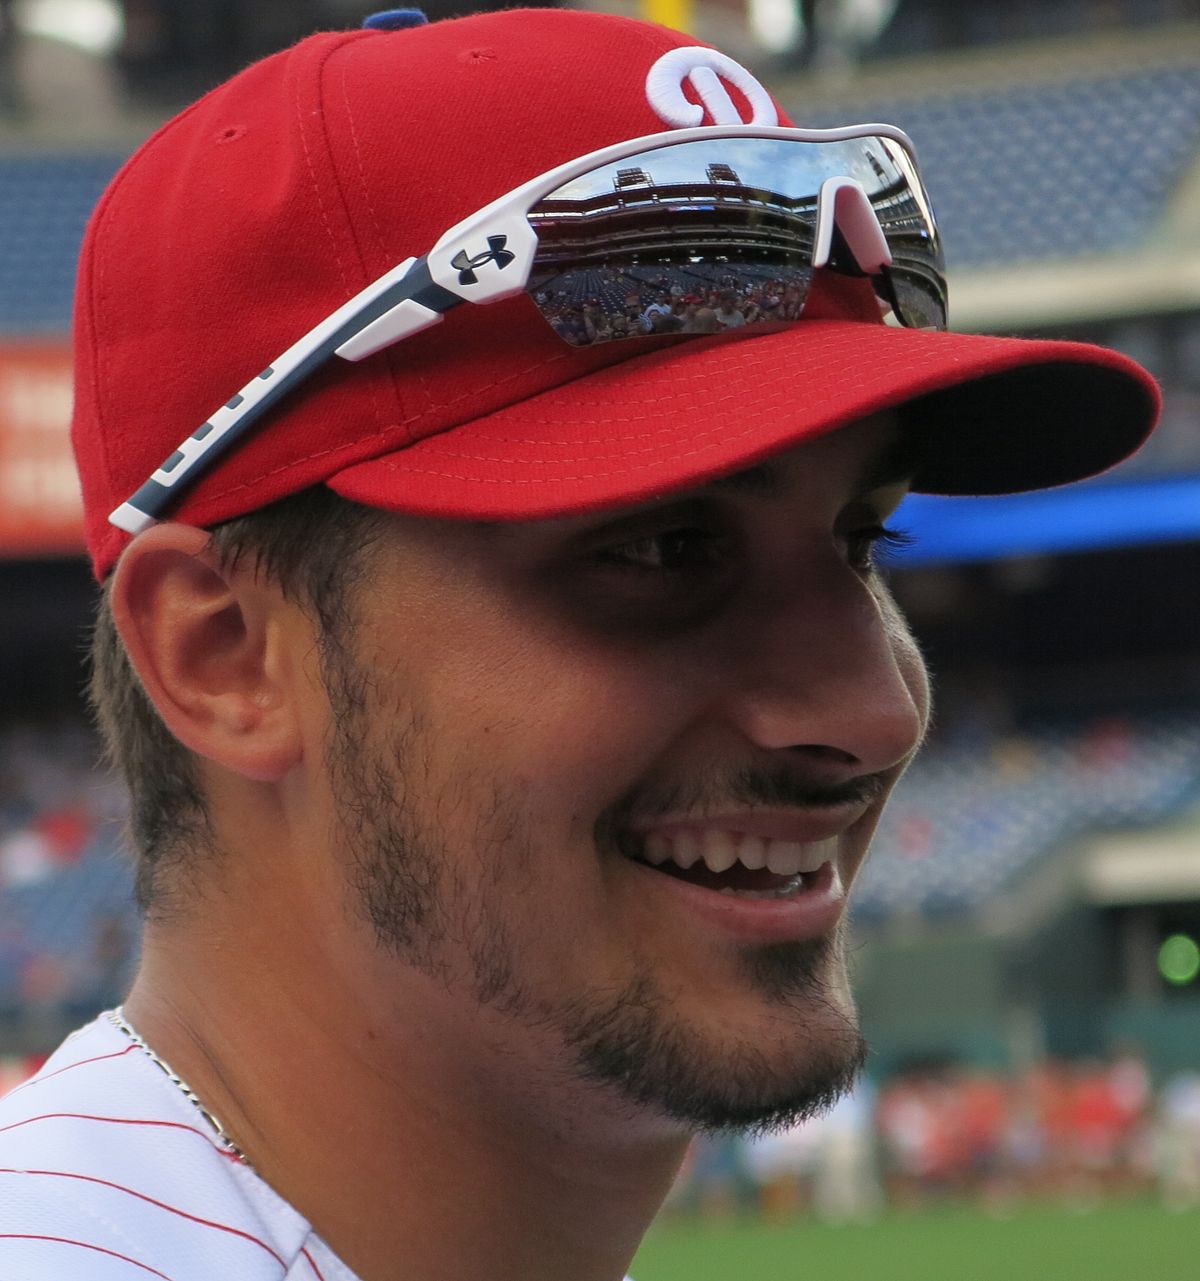 Is there another gear for Zach Eflin? - The Good Phight